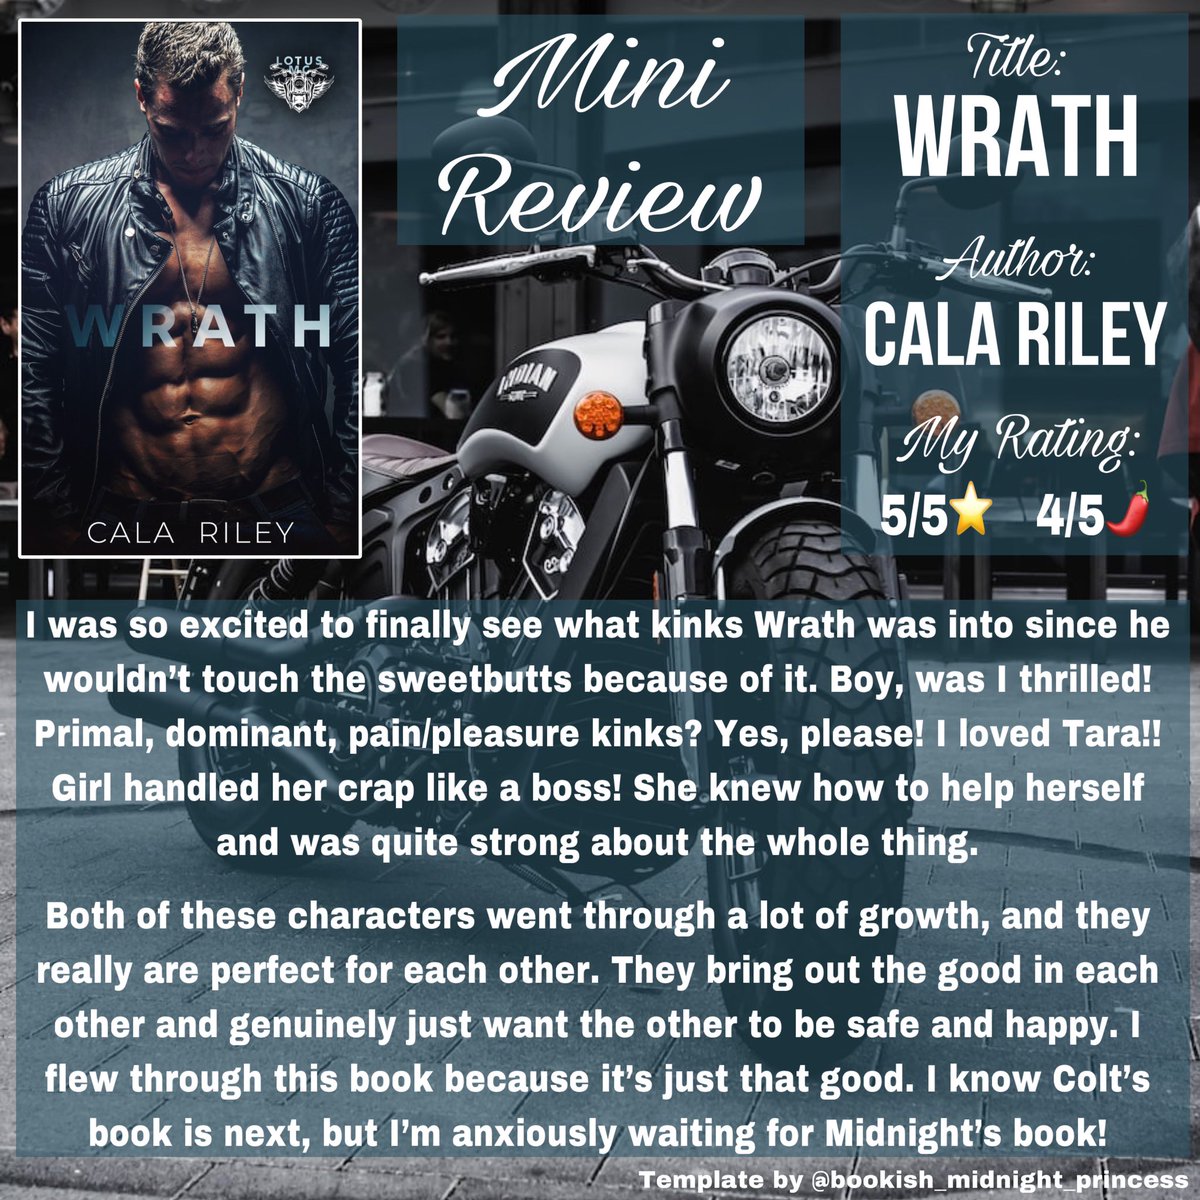 📖ARC Review📖

My Rating: 5/5⭐️   4/5🌶️

Available on the 25th! 

#wrath #lotusmc #calariley #mcromance #mcromancebooks #darkromance #darkromancebooks #smutbooks #primalkink #alphahero #comingsoon #preorder #kindle #kindleunlimited #arcreview #bookreview #books